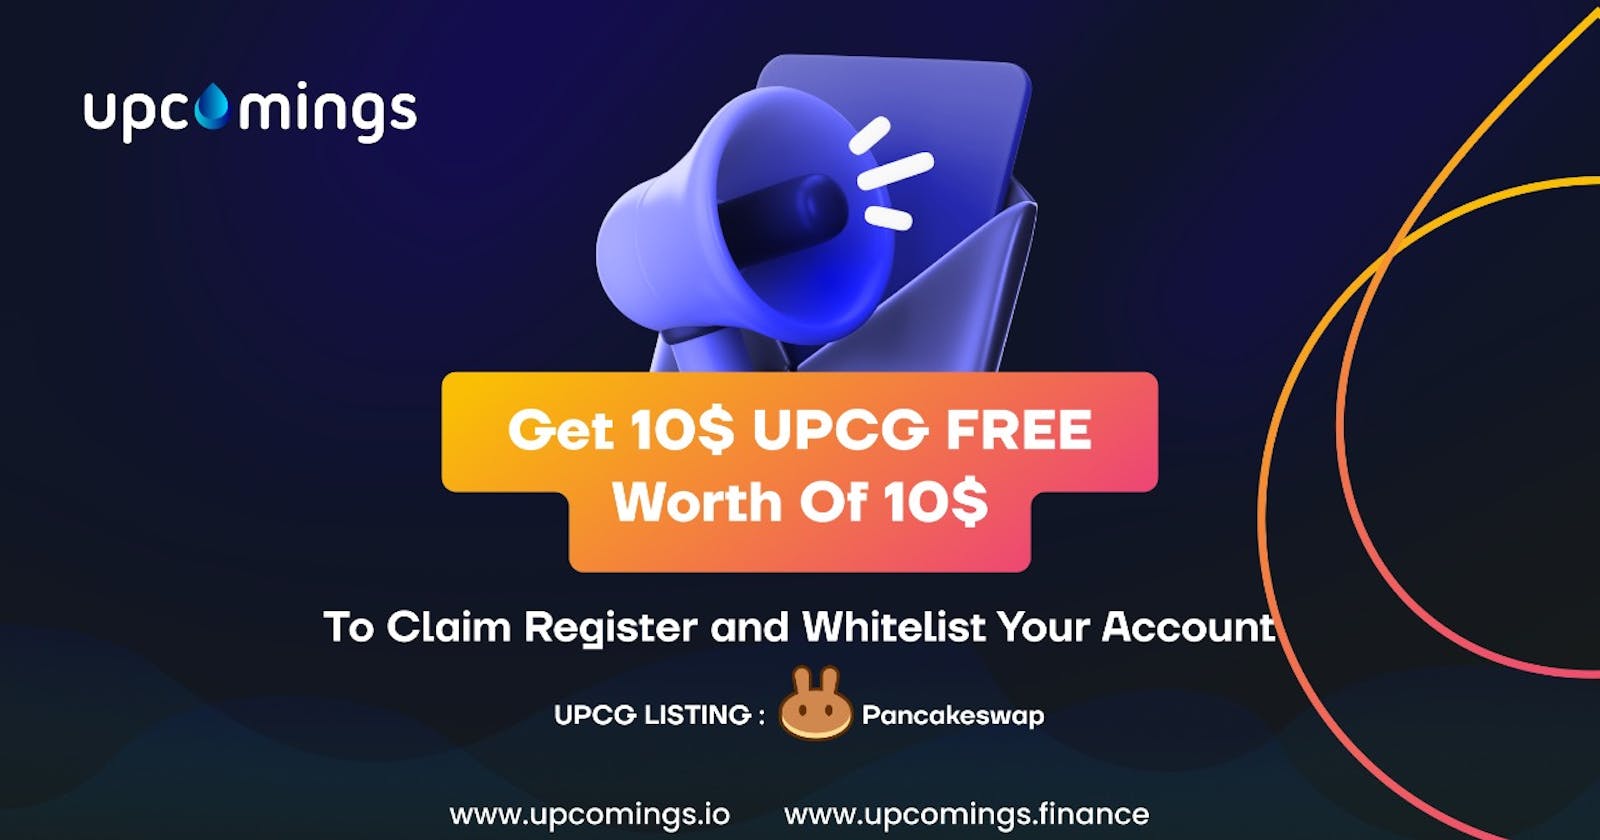 The #UpcomingsDAO Whitelist is live with its benefits and incredible utilities.